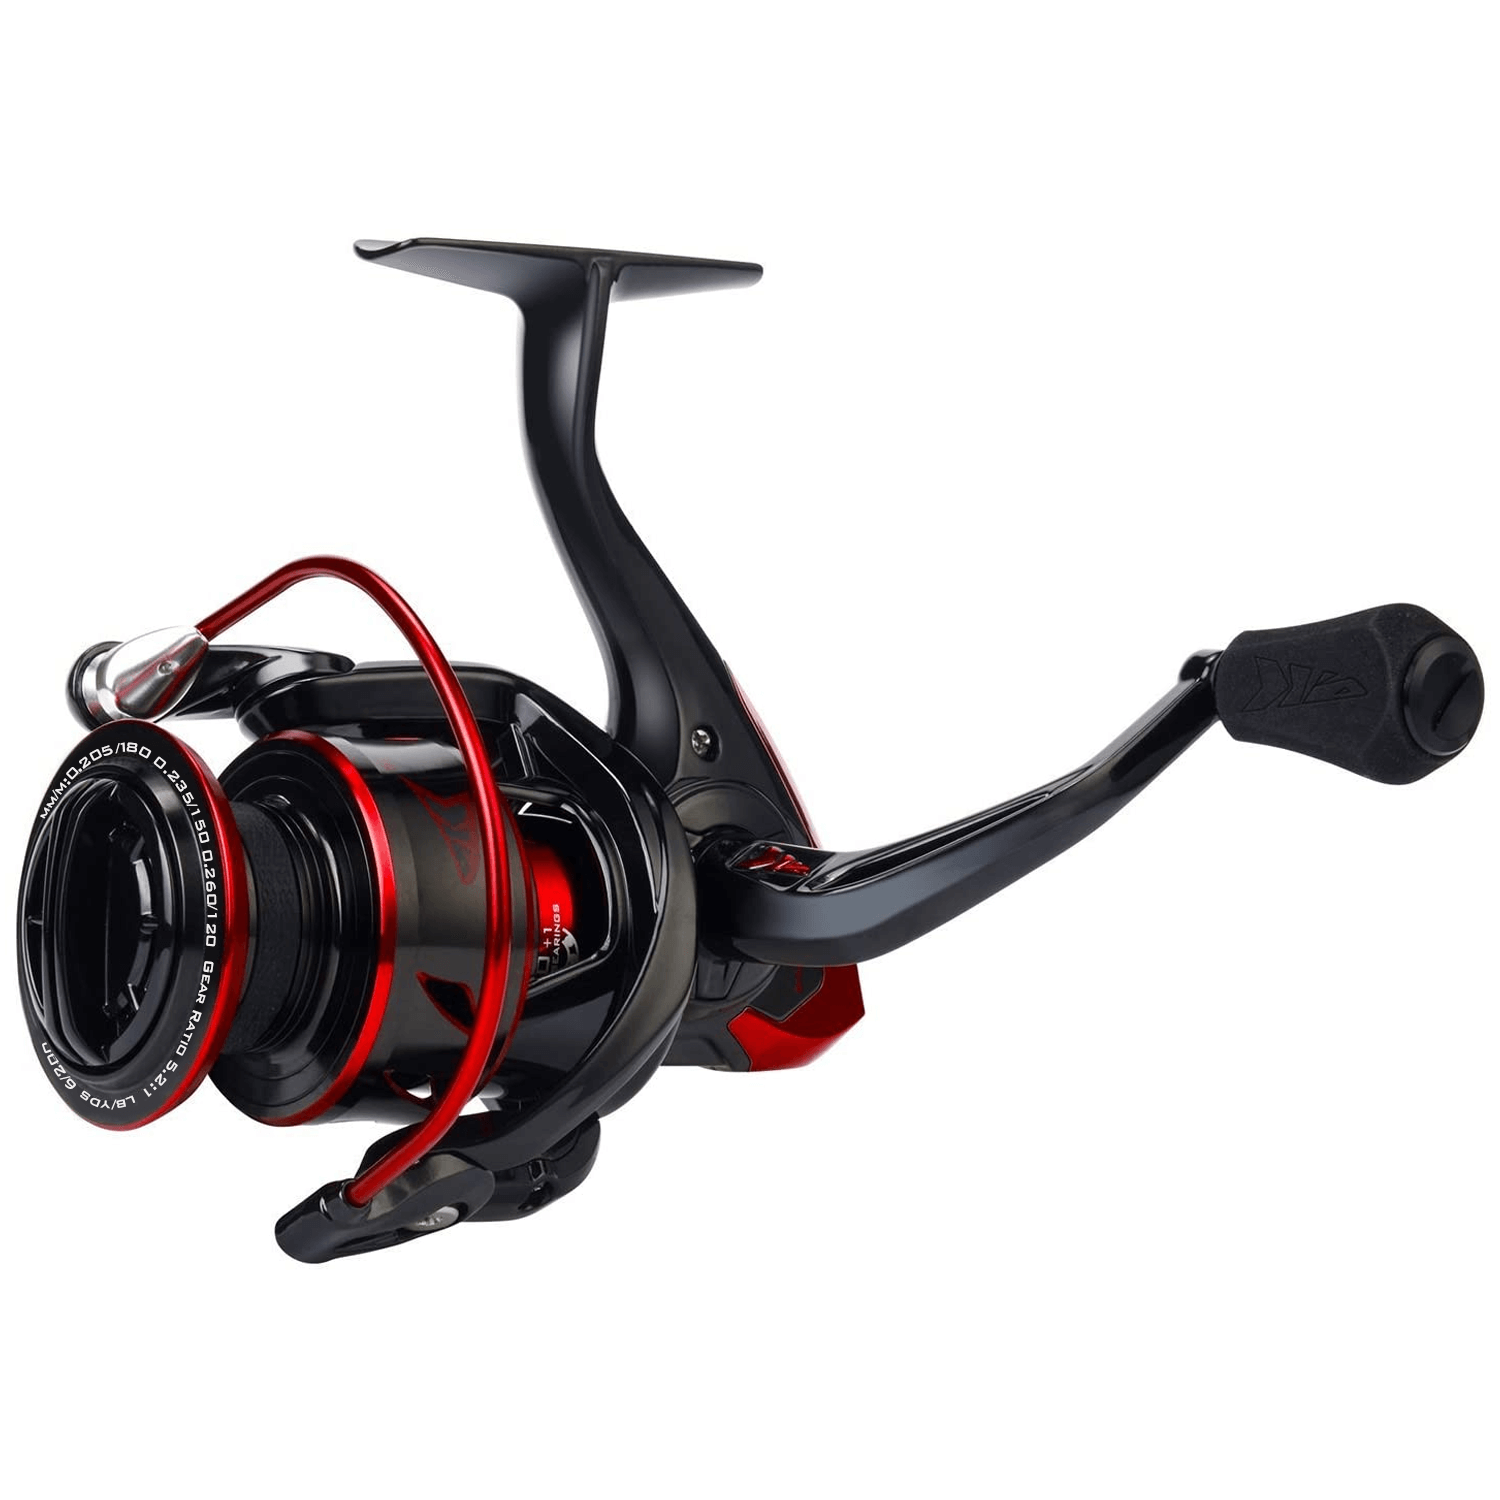 KastKing Sharky III Fishing Reel - New Spinning Reel - Carbon Fiber 39.5 lbs Max Drag - 10+1 Stainless Bb for Saltwater or Freshwater - Oversize Shaft